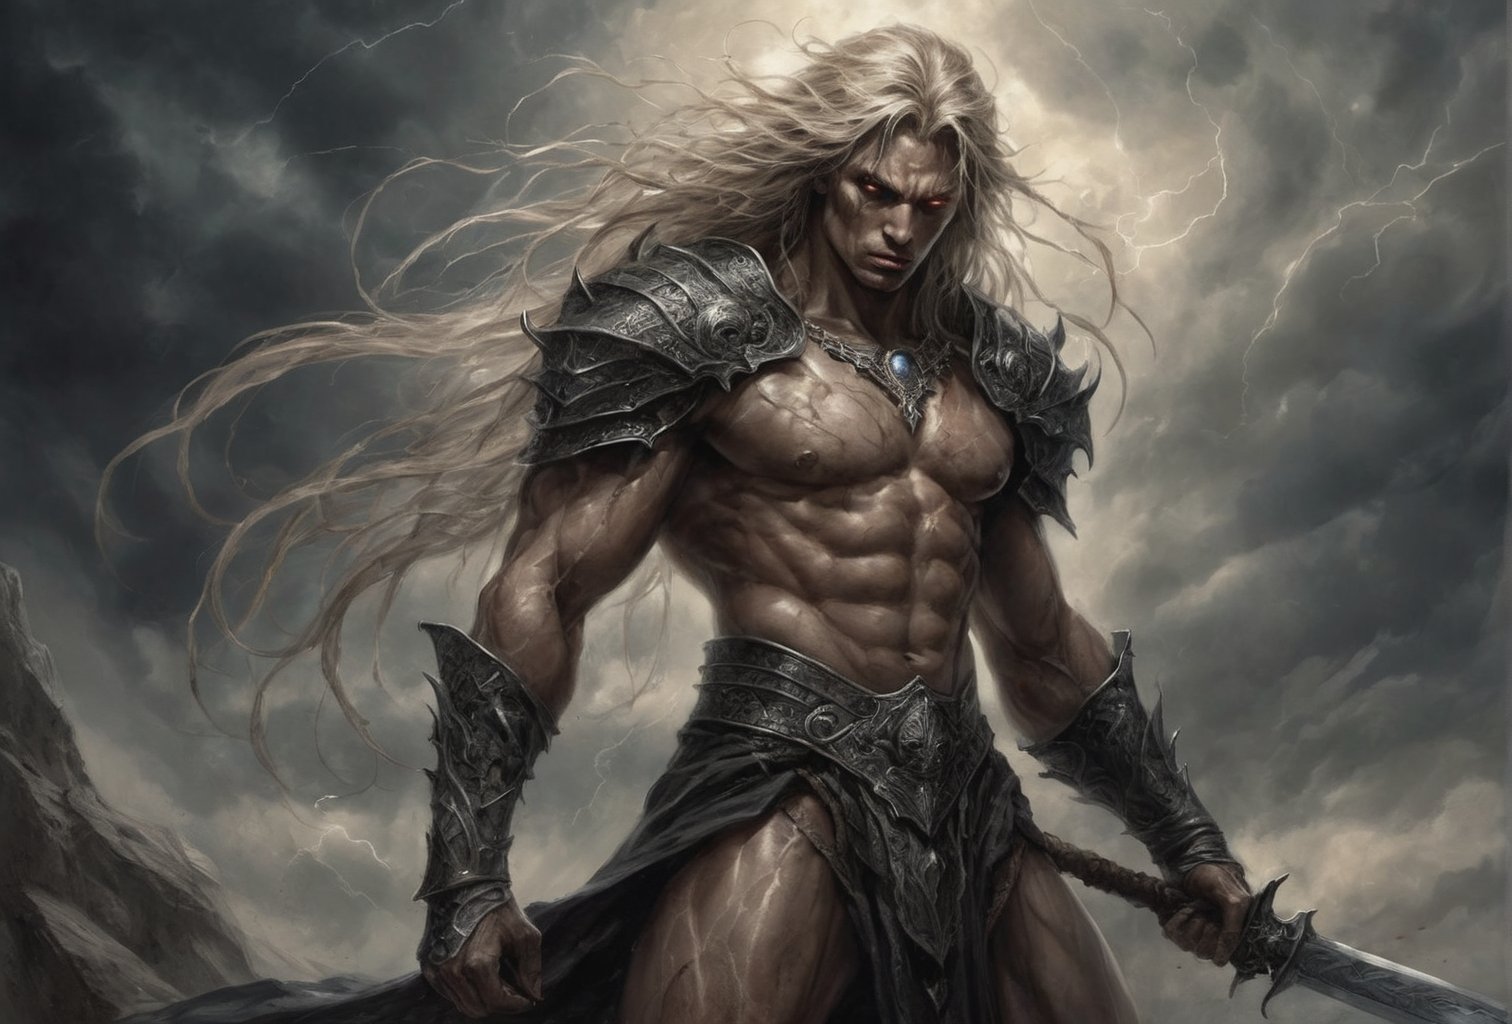 Create a portrait of the main antagonist of the demigod, he has long, flowing hair the color of storm clouds, serpentine creature with scales as black as night, glowing eyes like lightning, and razor-sharp teeth. </br> It is impossible to tell its age or gender as it is a mythological creature. captivating with mystery and at the same time repulsive, from whose gaze your throat dries up and you are speechless, but you can feel his strong spirit and sense of heroism, so that sometimes you don't understand whether he is a villain or a hero in front of you.
Style of Medieval fantasy warrior art by Luis Royo. tan, black, tan, blanchedalmond colors. 8K HD.